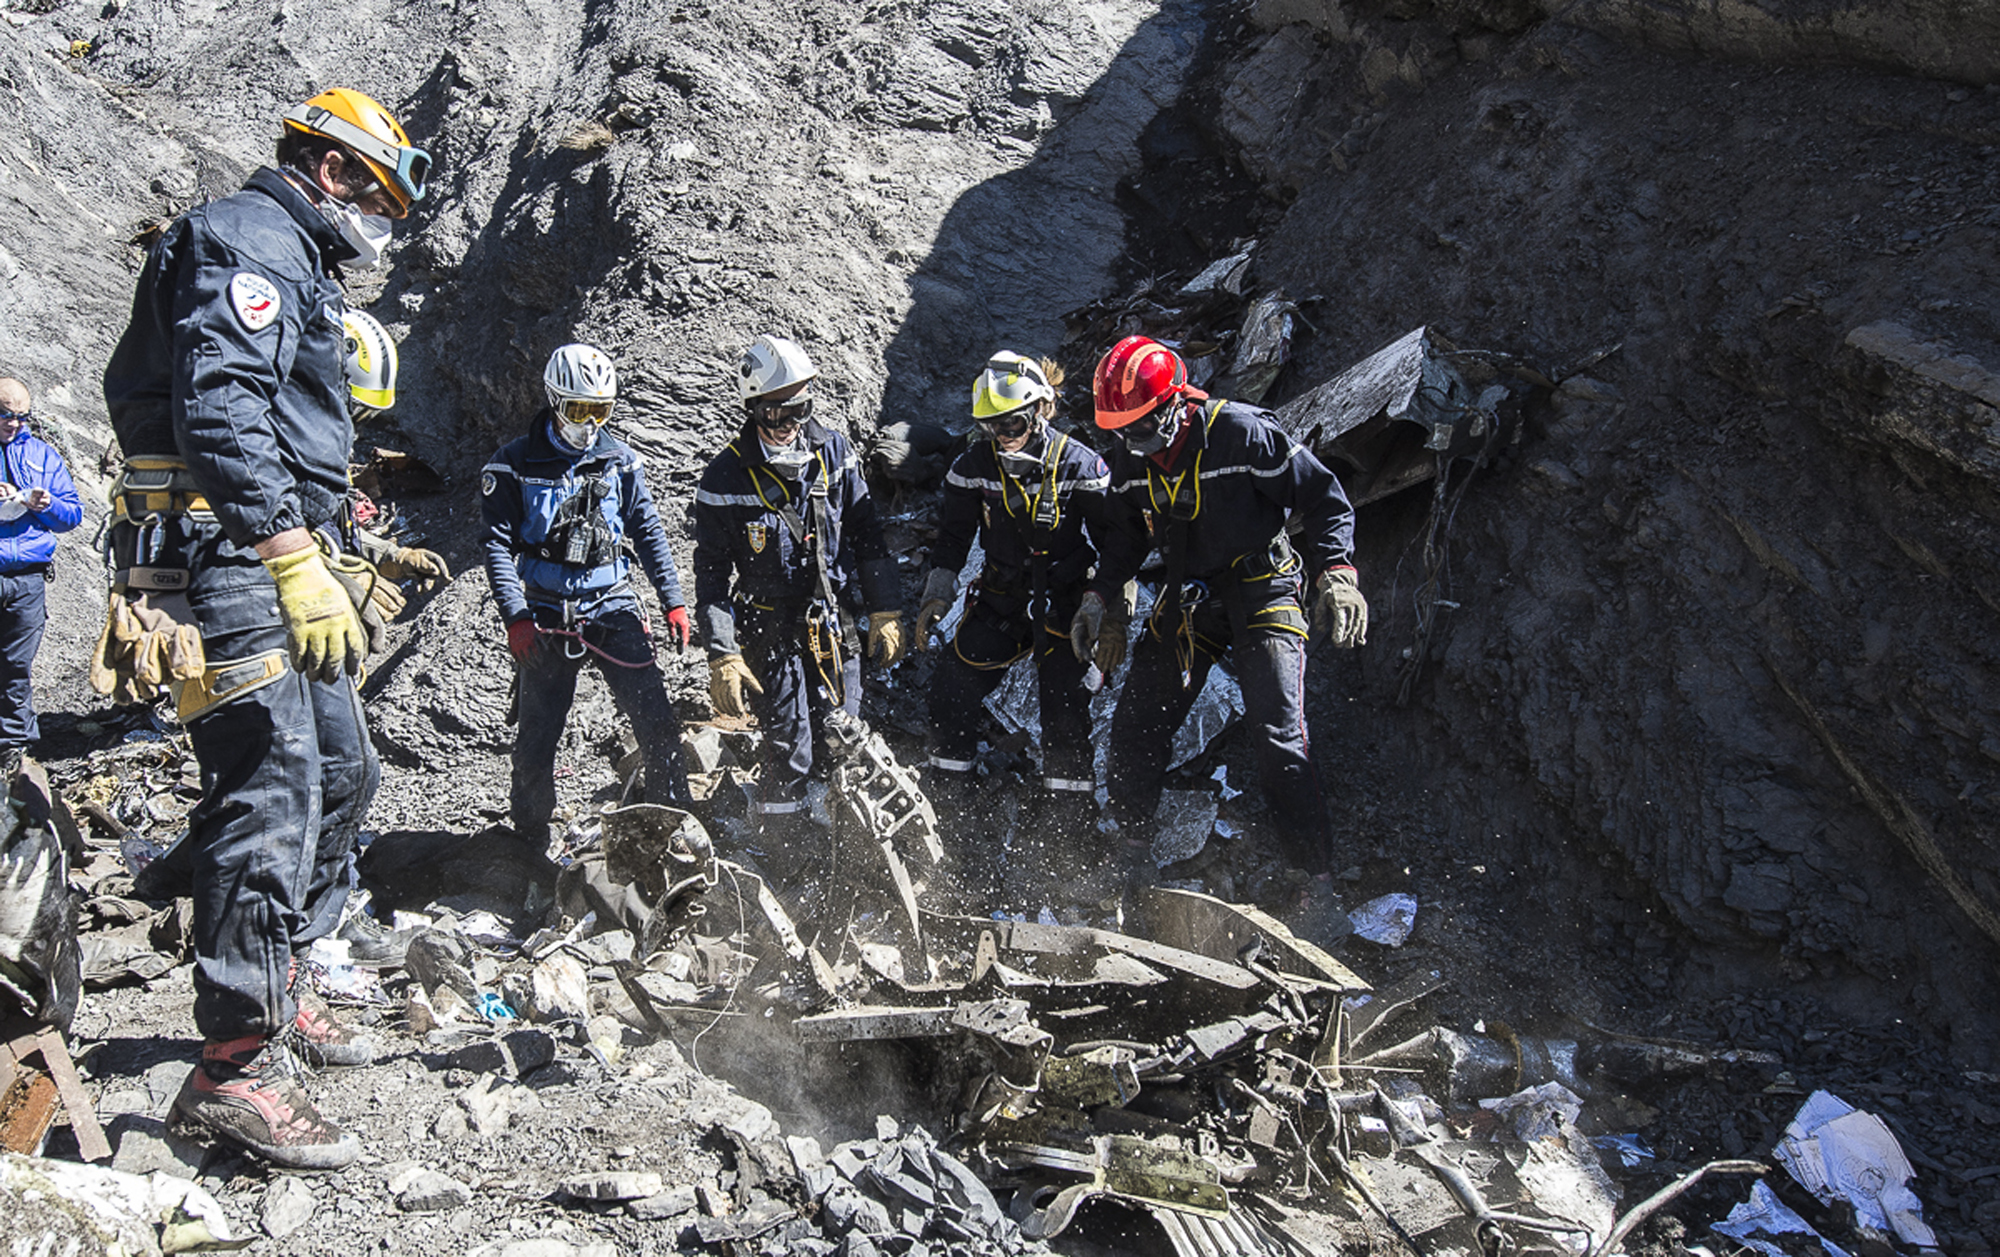 PHOTO: French emergency rescue services work among debris of the Germanwings passenger jet at the crash site near Seyne-les-Alpes, France in this March 31, 2015 file photo.